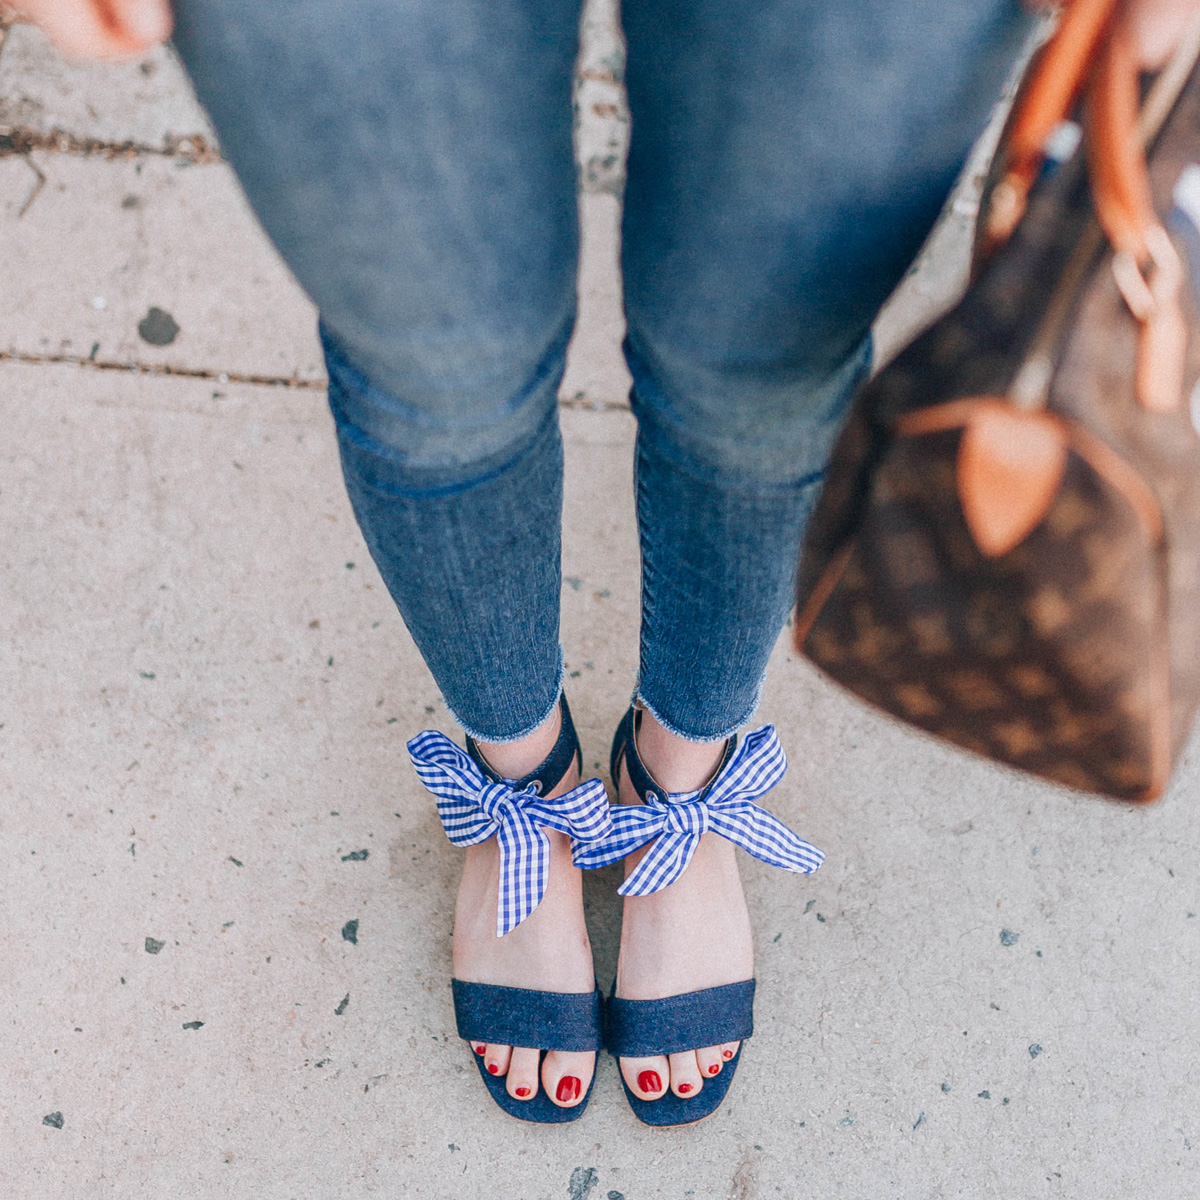 Gingham Bow Sandals